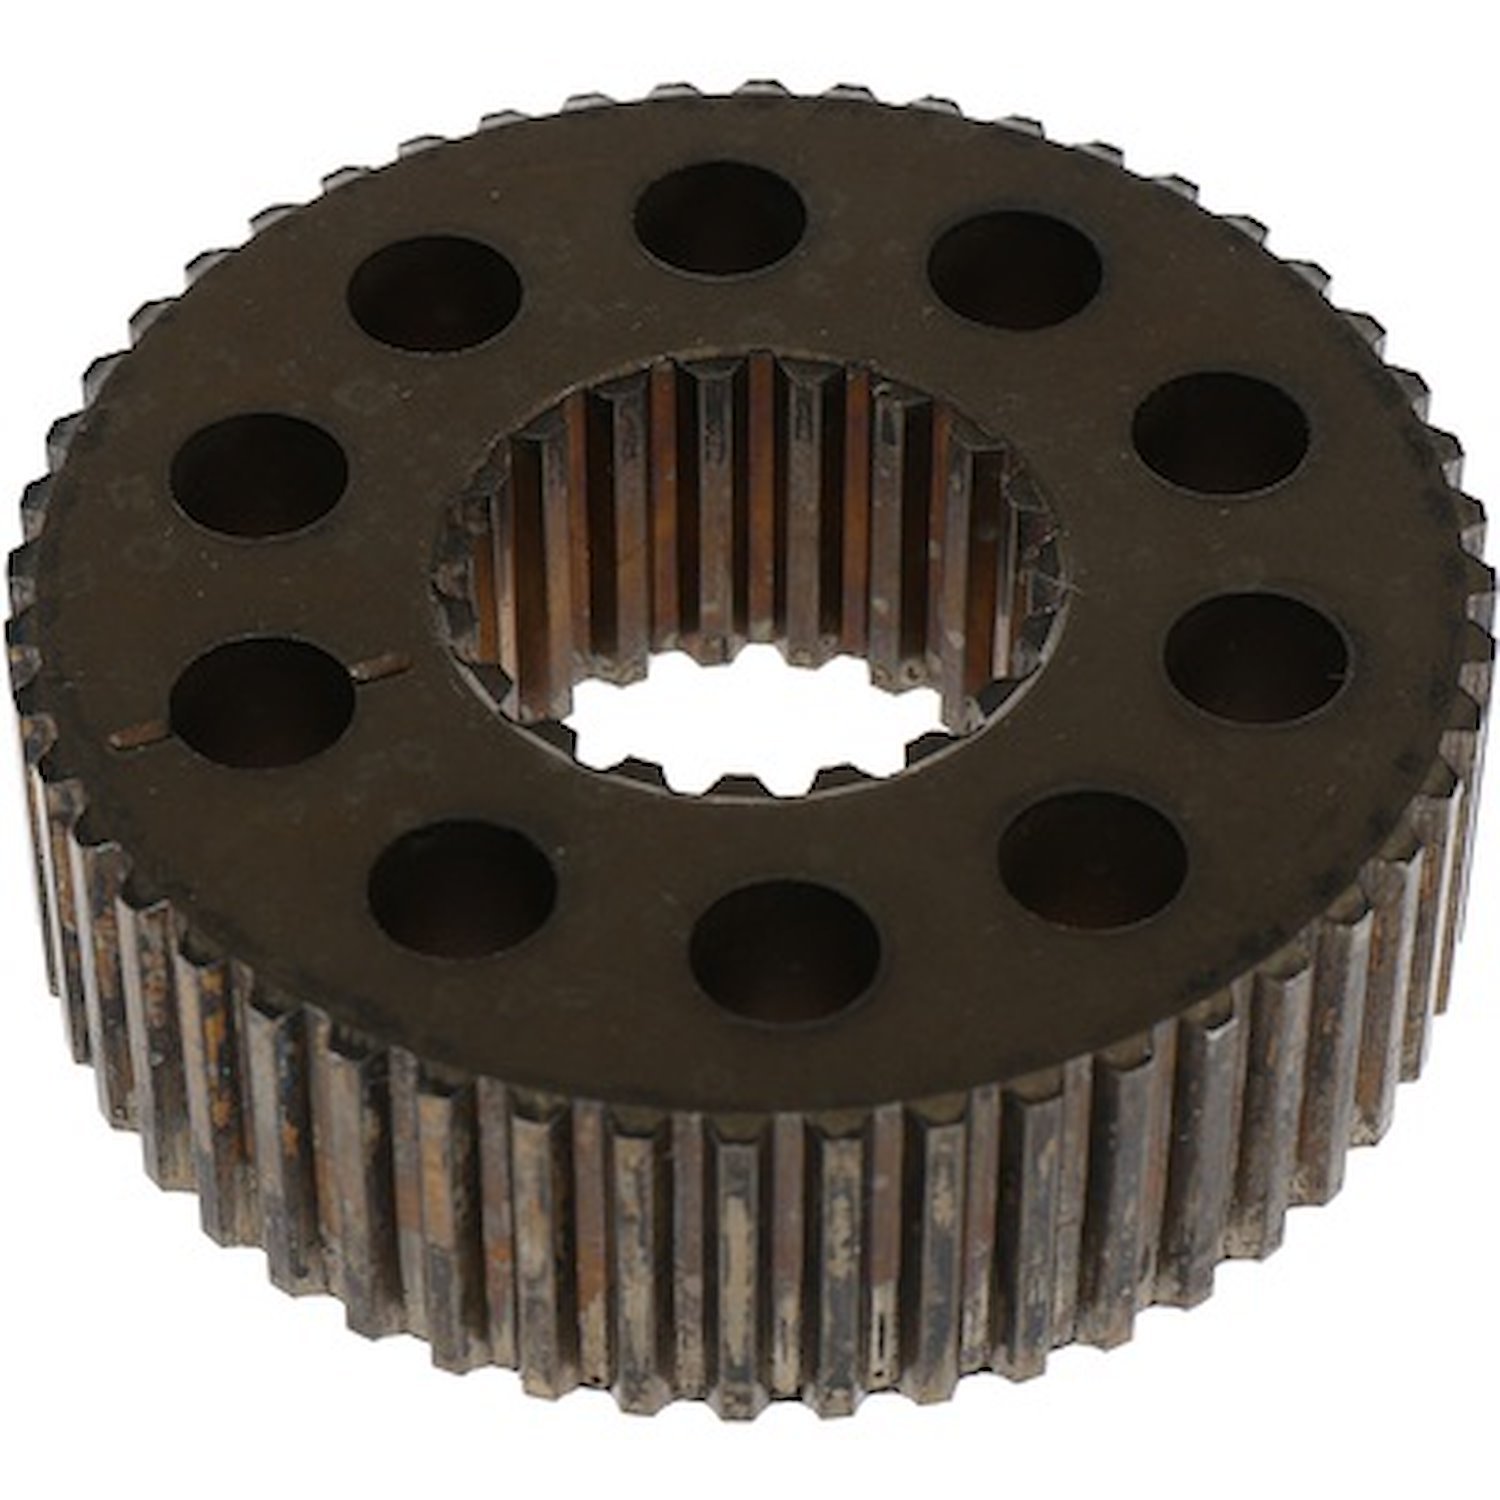 Dana 44 Front Axle Drive Hub Gear for Select 1978-1991 GM & Jeep Models